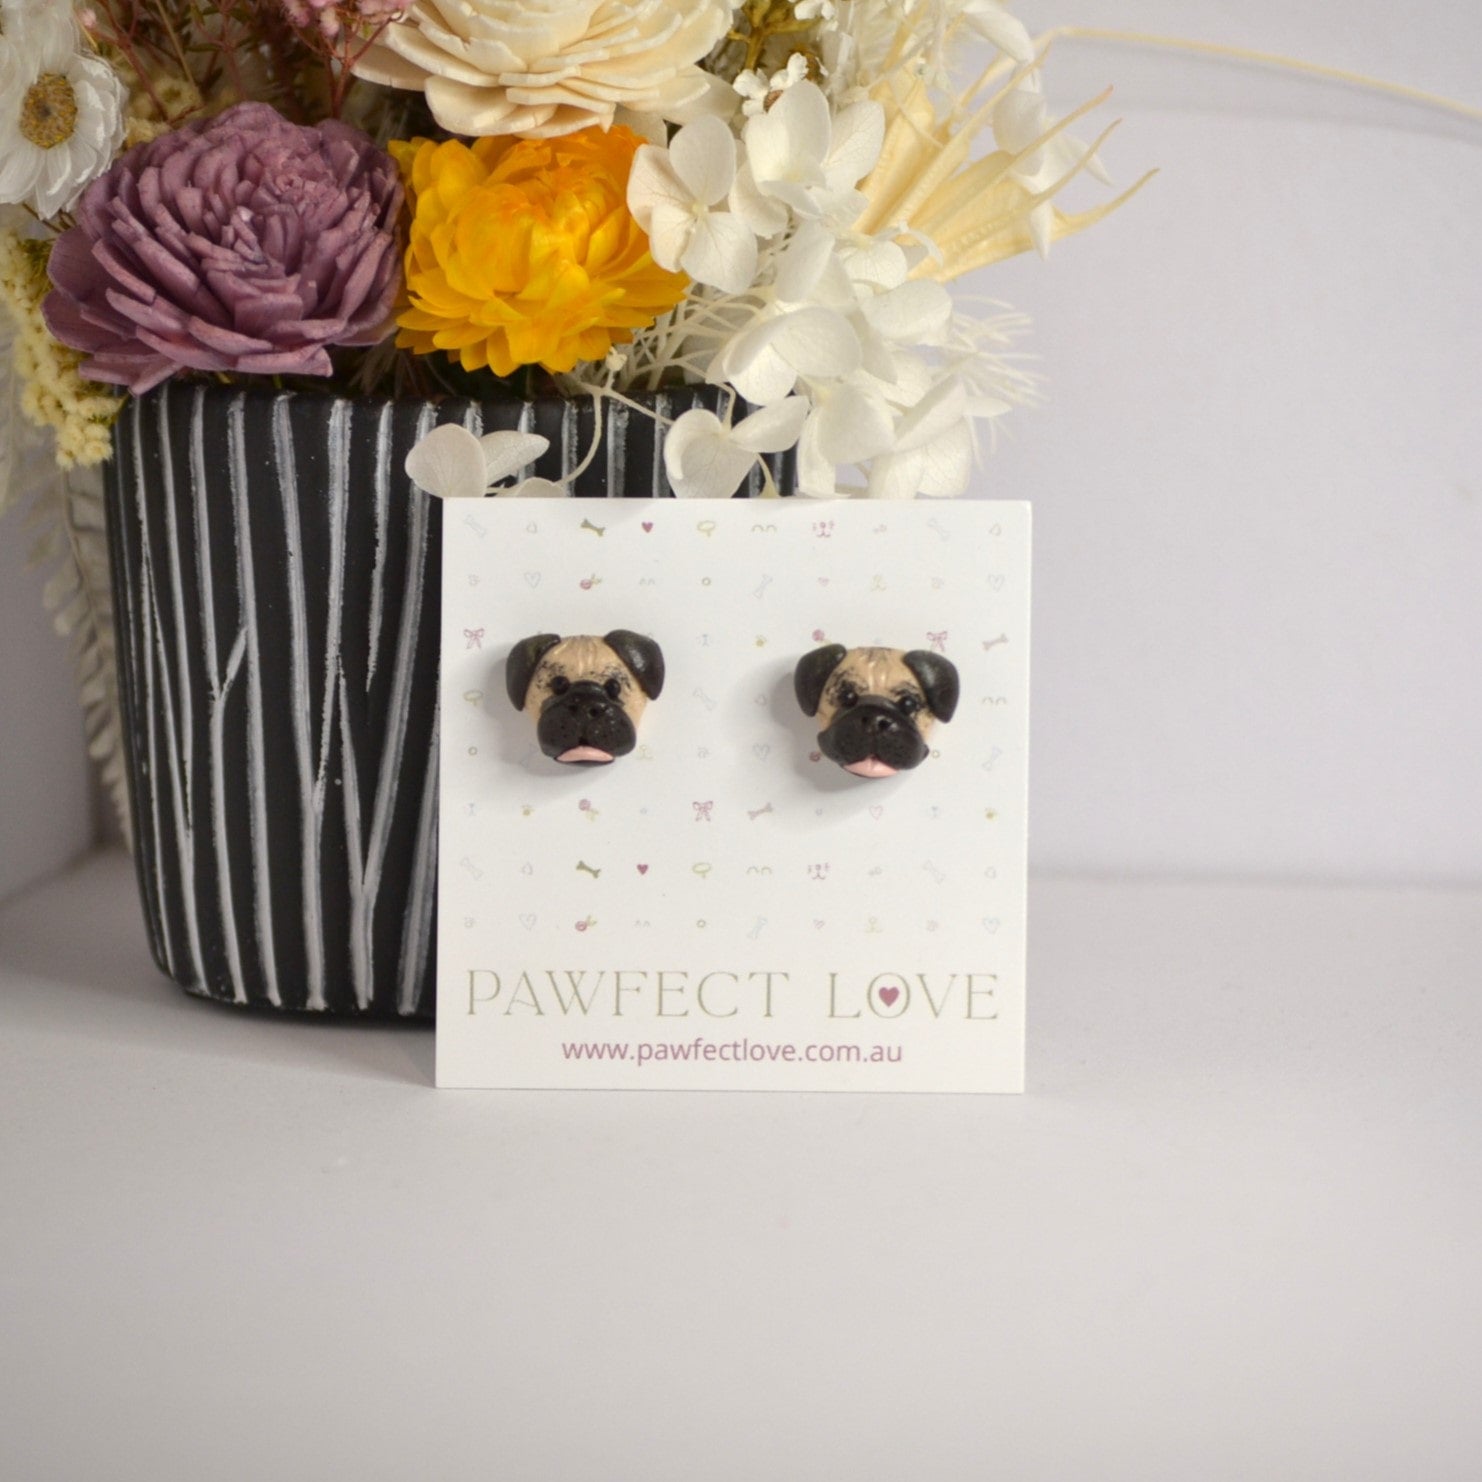 Handmade Pug stud earrings by Pawfect Love, positioned in front of dried flower arrangement